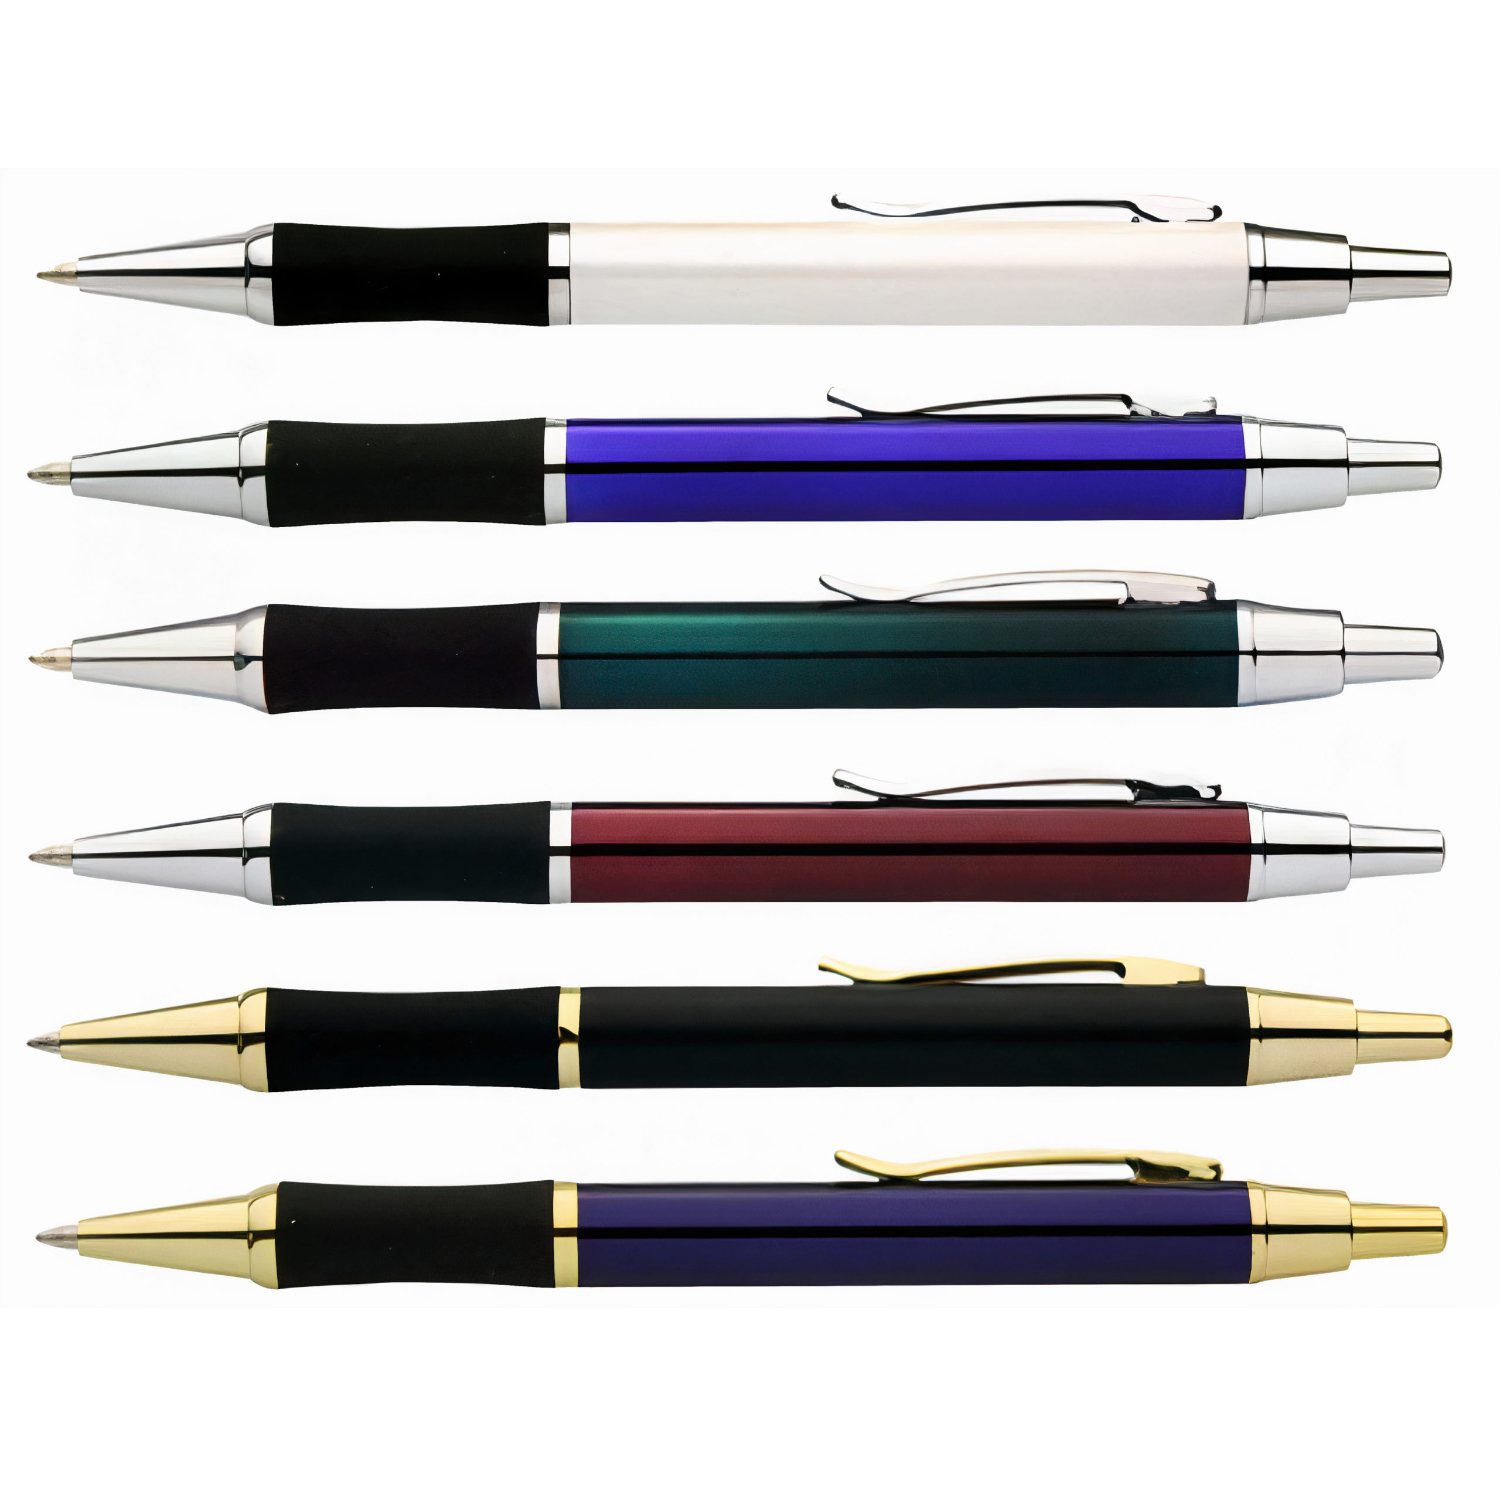 Metal Pens Laser Engraved with Rubber Grip Oxford Metal Pen high quality metal pen